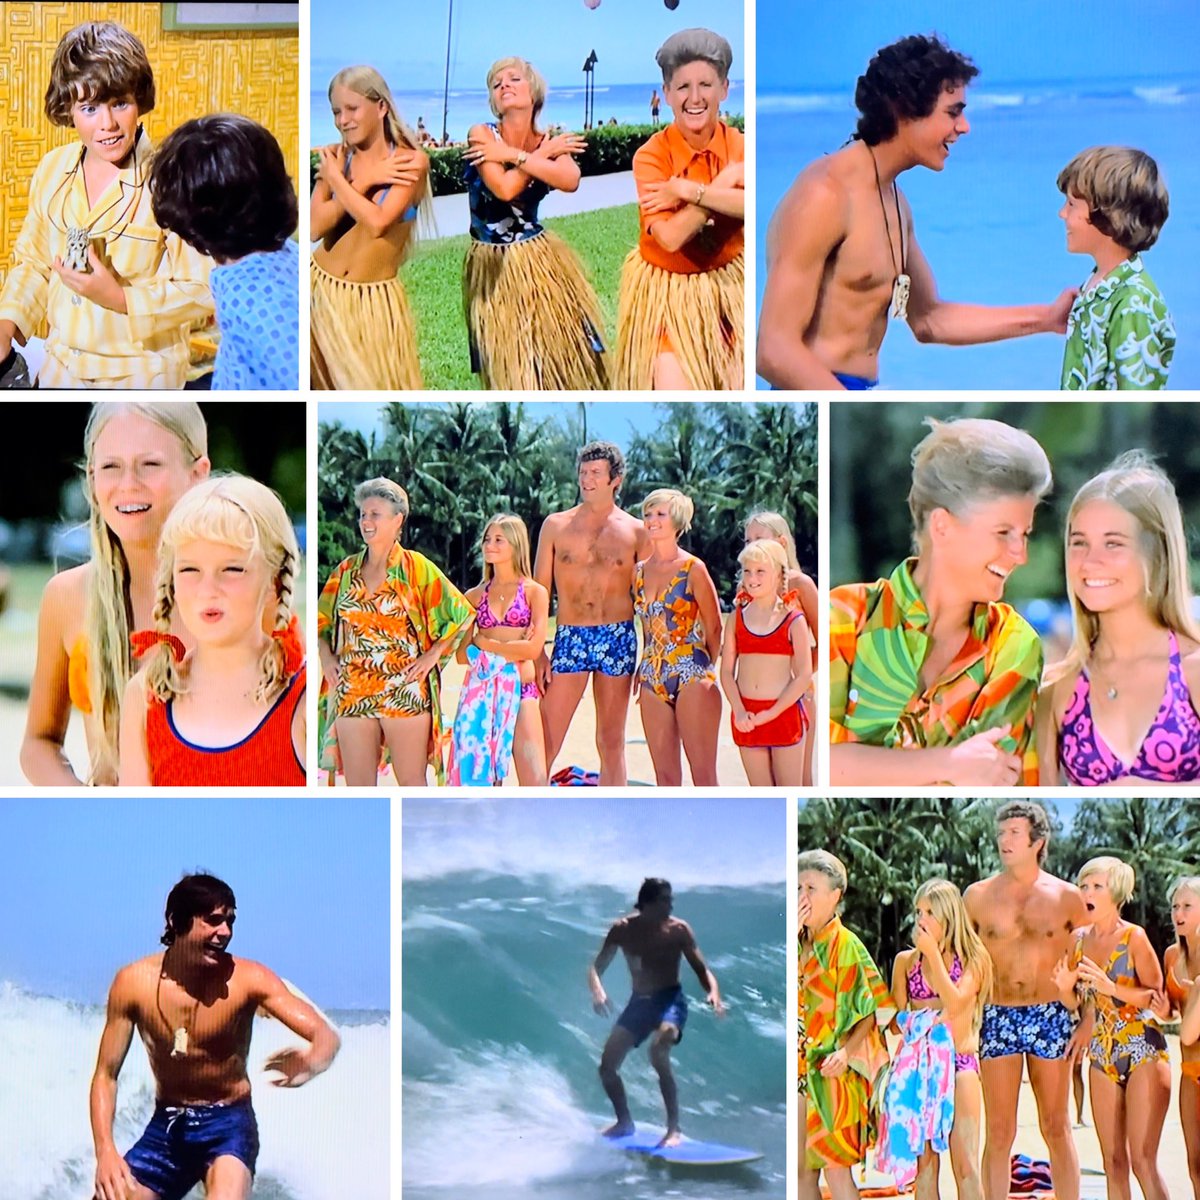 Aloha! ☀️🌴🏄🌺🌊This beautiful and groovy episode first aired 50 years ago today!! #hawaii #bradybunch #surfing #Anniversary #tiki #hula @MoMcCormick7 @MrBarryWilliams @CKnightBrands @Therealeveplumb